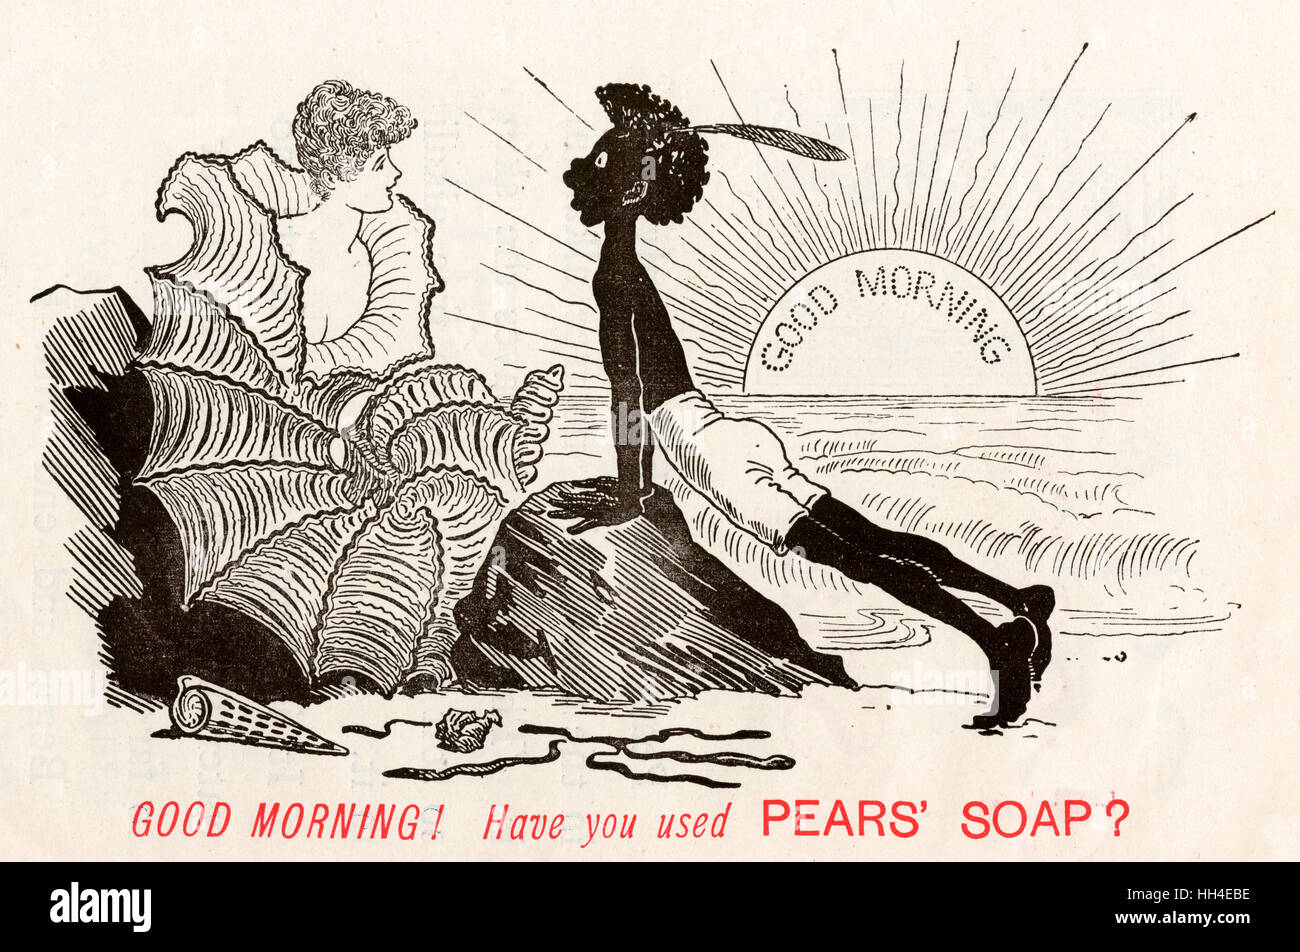 Good Morning!  Have you used Pears' Soap?  (racist advert) Stock Photo